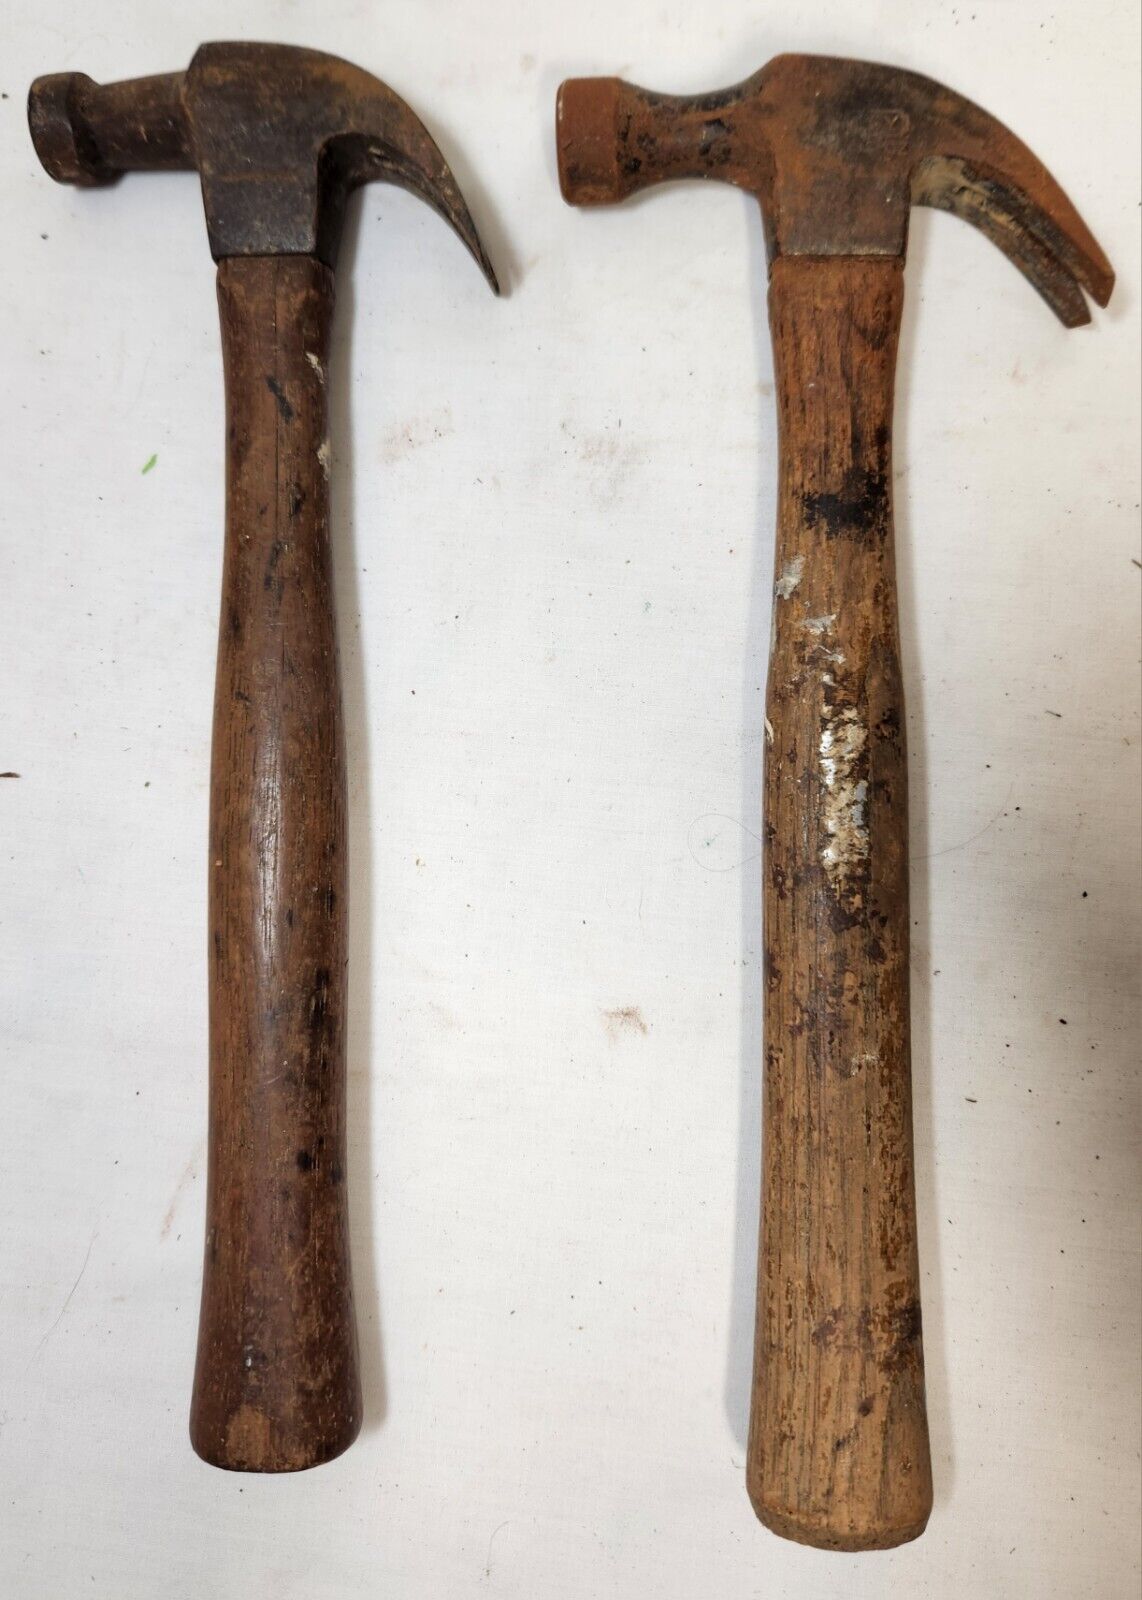 Vintage Stanley Claw Hammers Wooden Handle Lot of 2